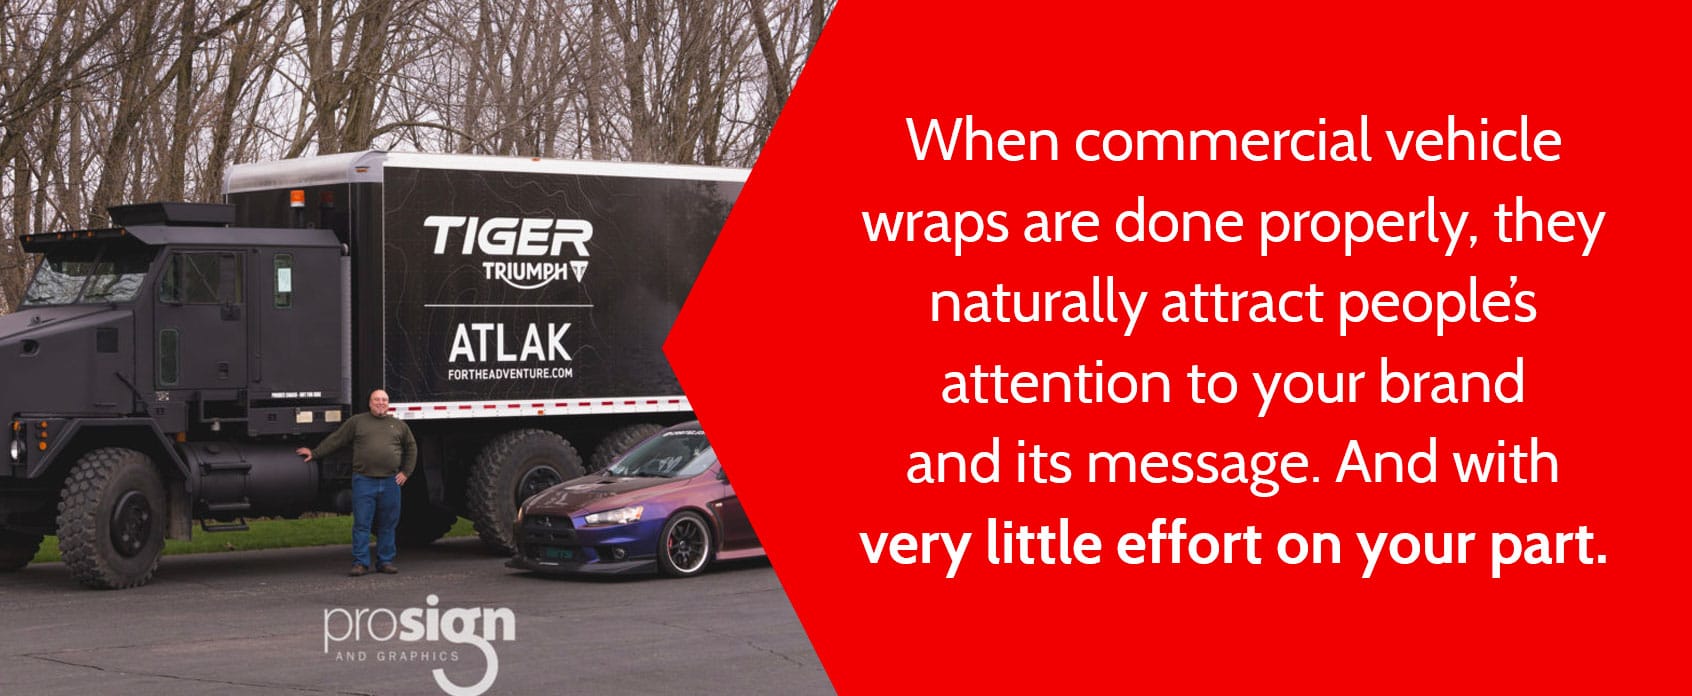 Military-style semi truck with a black wrap of the company name & logo, and a quote from the article next to it.